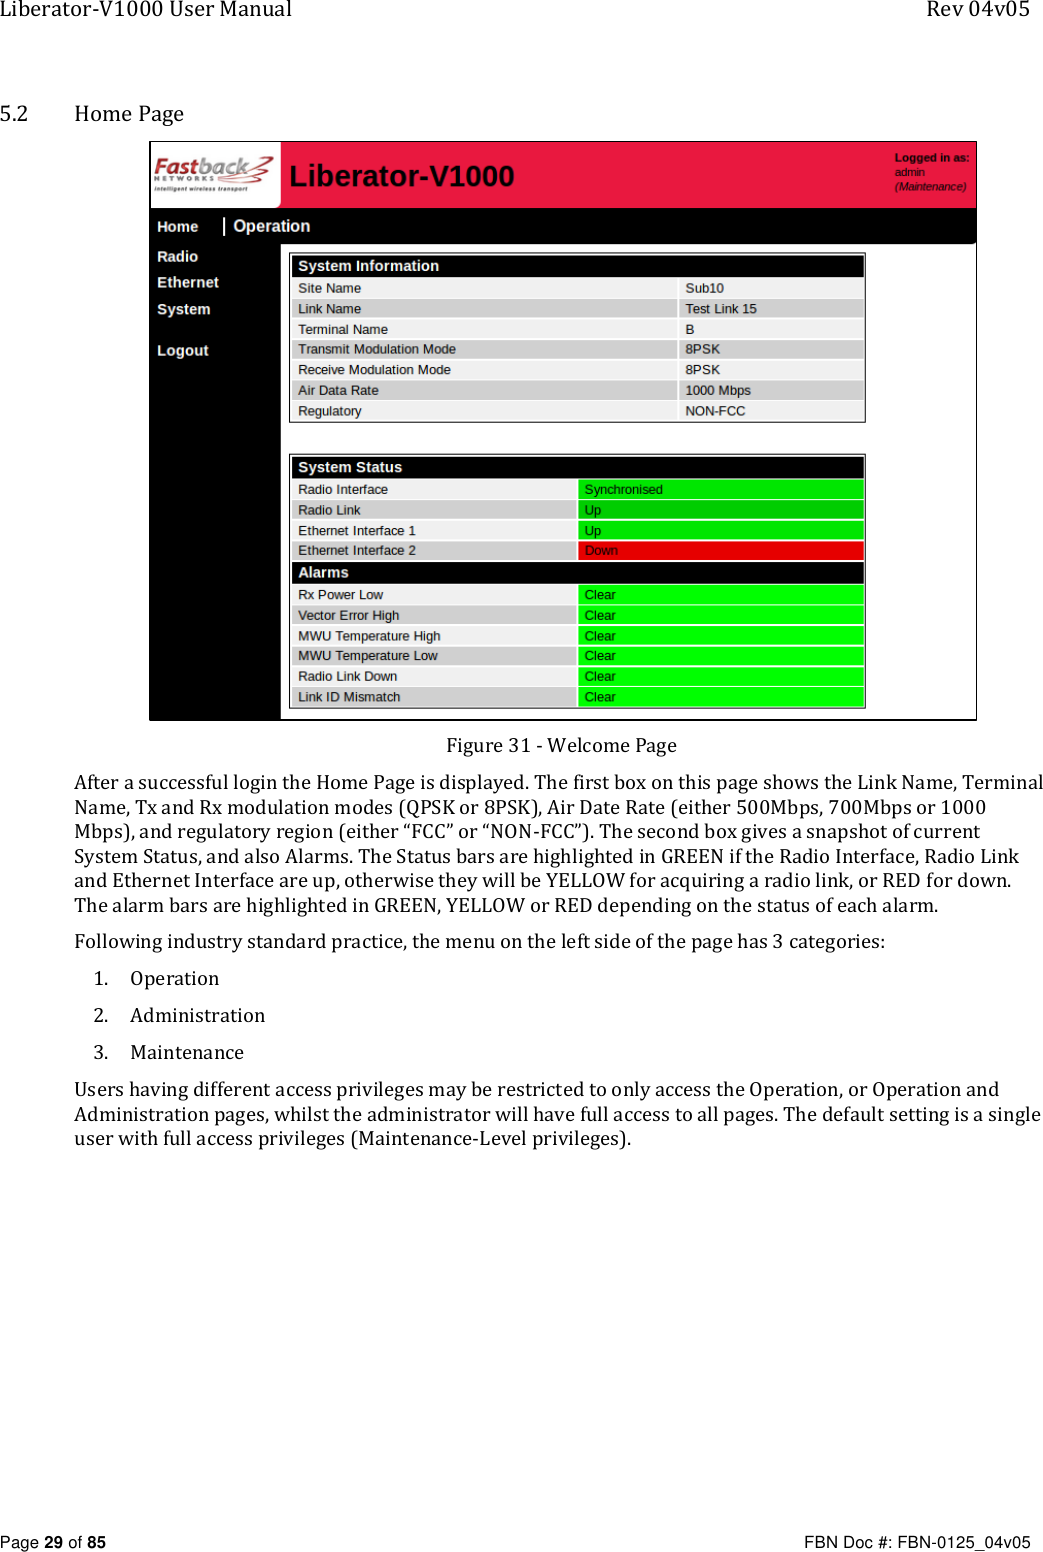 Liberator-V1000 User Manual  Rev 04v05     Page 29 of 85   FBN Doc #: FBN-0125_04v05 5.2 Home Page  Figure 31 - Welcome Page After a successful login the Home Page is displayed. The first box on this page shows the Link Name, Terminal Name, Tx and Rx modulation modes (QPSK or 8PSK), Air Date Rate (either 500Mbps, 700Mbps or 1000 Mbps), and regulatory region (either “FCC” or “NON-FCC”). The second box gives a snapshot of current System Status, and also Alarms. The Status bars are highlighted in GREEN if the Radio Interface, Radio Link and Ethernet Interface are up, otherwise they will be YELLOW for acquiring a radio link, or RED for down. The alarm bars are highlighted in GREEN, YELLOW or RED depending on the status of each alarm. Following industry standard practice, the menu on the left side of the page has 3 categories: 1. Operation 2. Administration 3. Maintenance Users having different access privileges may be restricted to only access the Operation, or Operation and Administration pages, whilst the administrator will have full access to all pages. The default setting is a single user with full access privileges (Maintenance-Level privileges).   